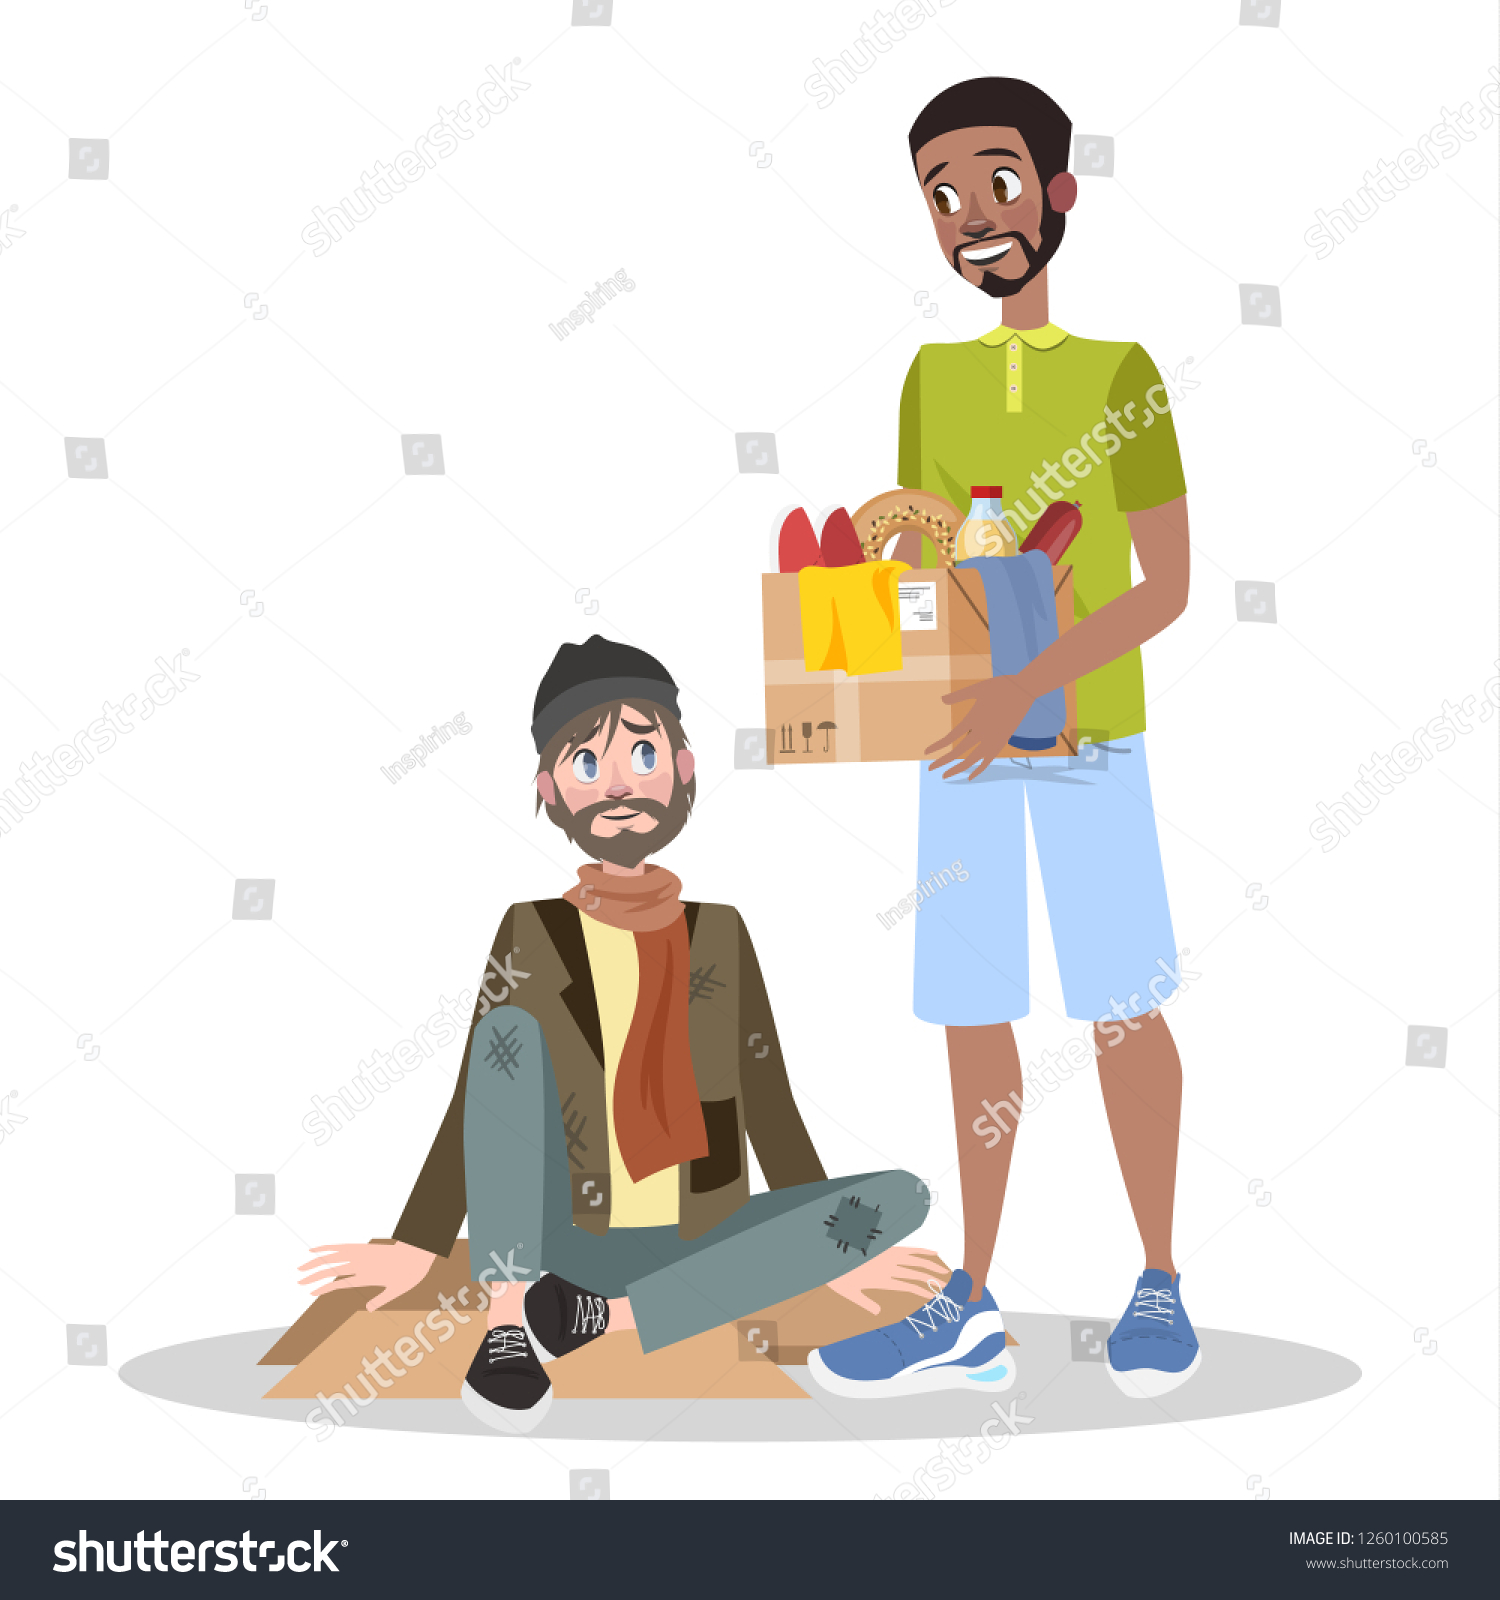 SVG of Volunteer help homeless man. Idea of charity and support. Care about people. Isolated vector flat illustration svg